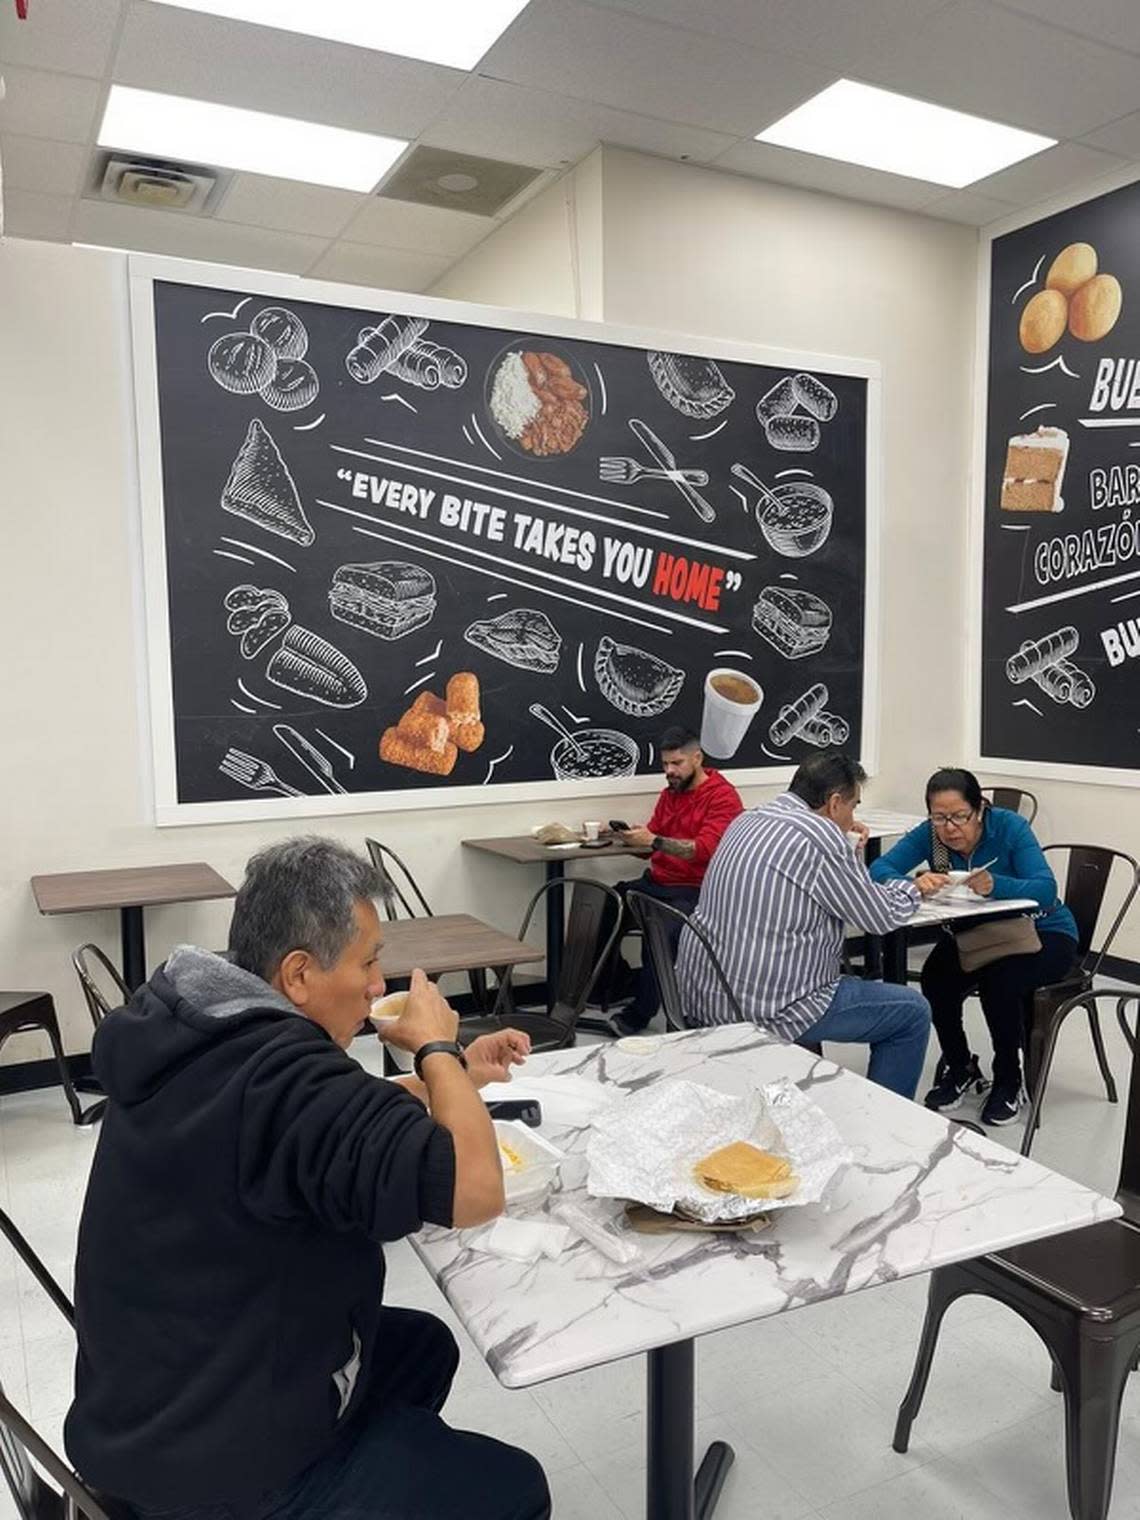 Twenty of Sedano’s 35 markets in Florida — including stores in Miami-Dade, Broward and Orlando — have indoor cafes and seating where shoppers can order sandwiches, empanadas, milkshakes, pastries and croquetas.